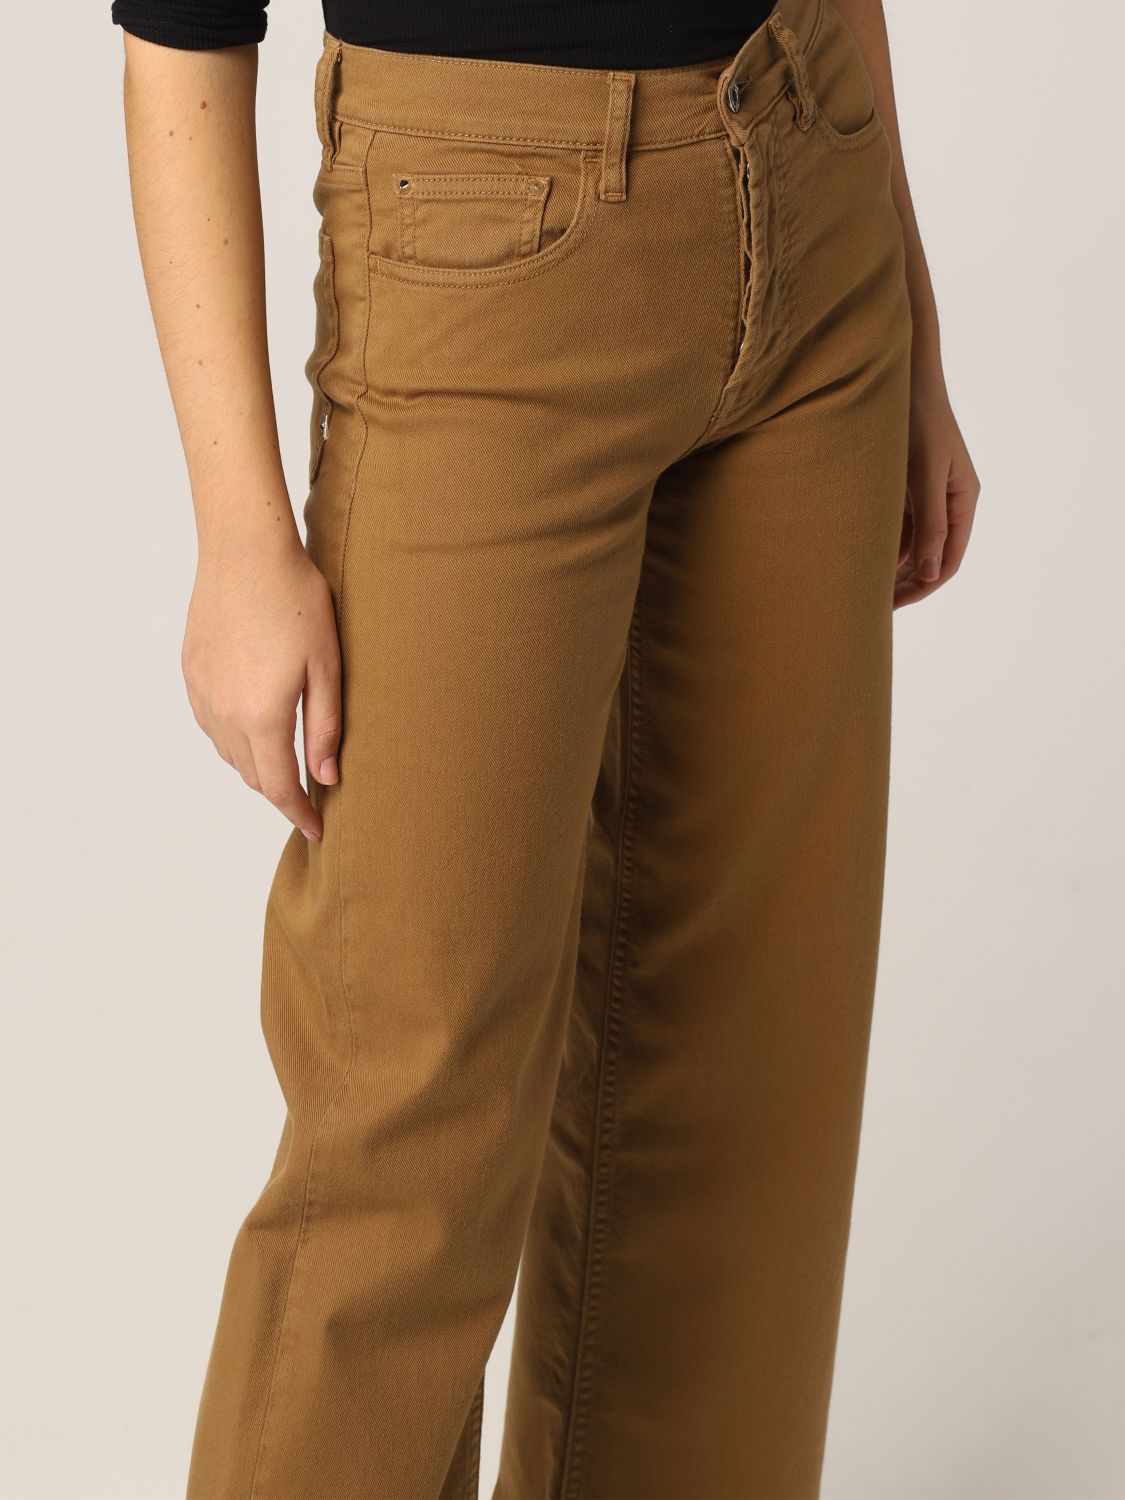 Jeans Cycle: Pants women Cycle camel 3